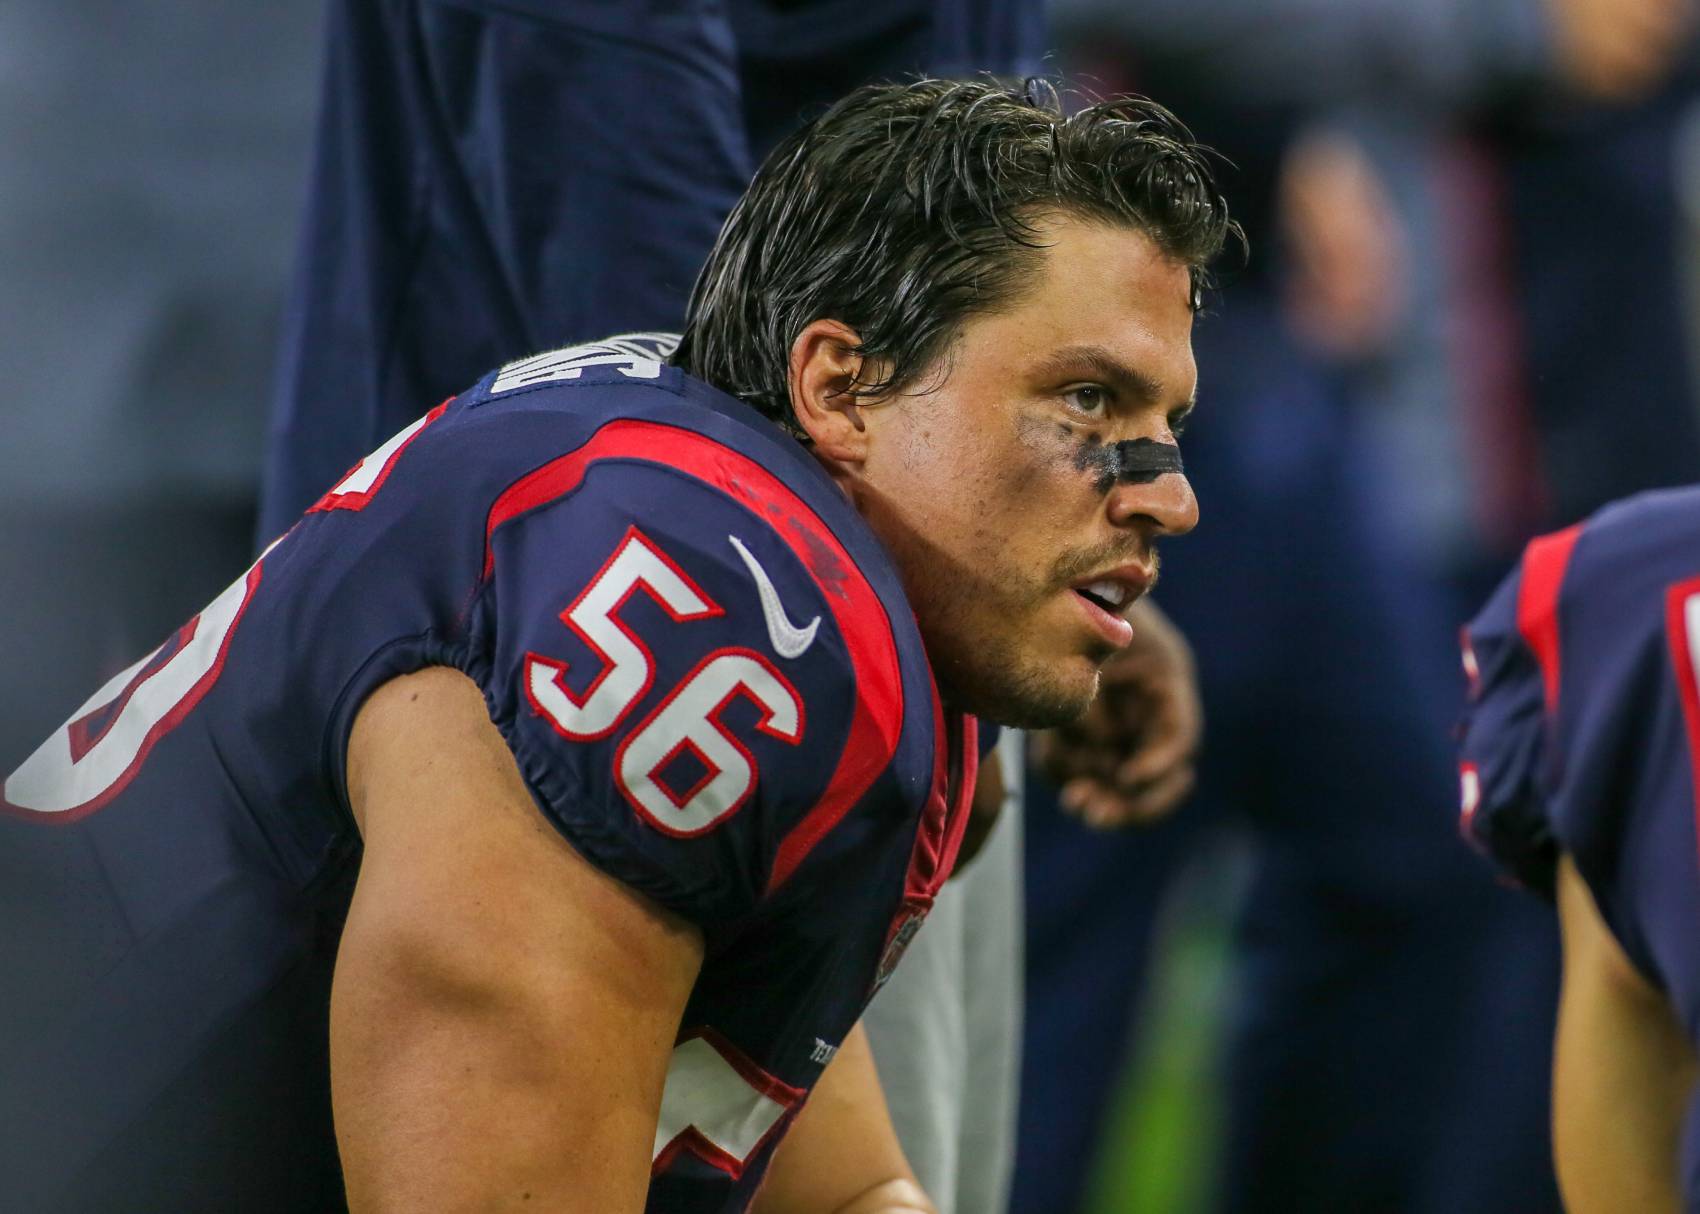 Brian Cushing played for the Houston Texans from 2009-17.